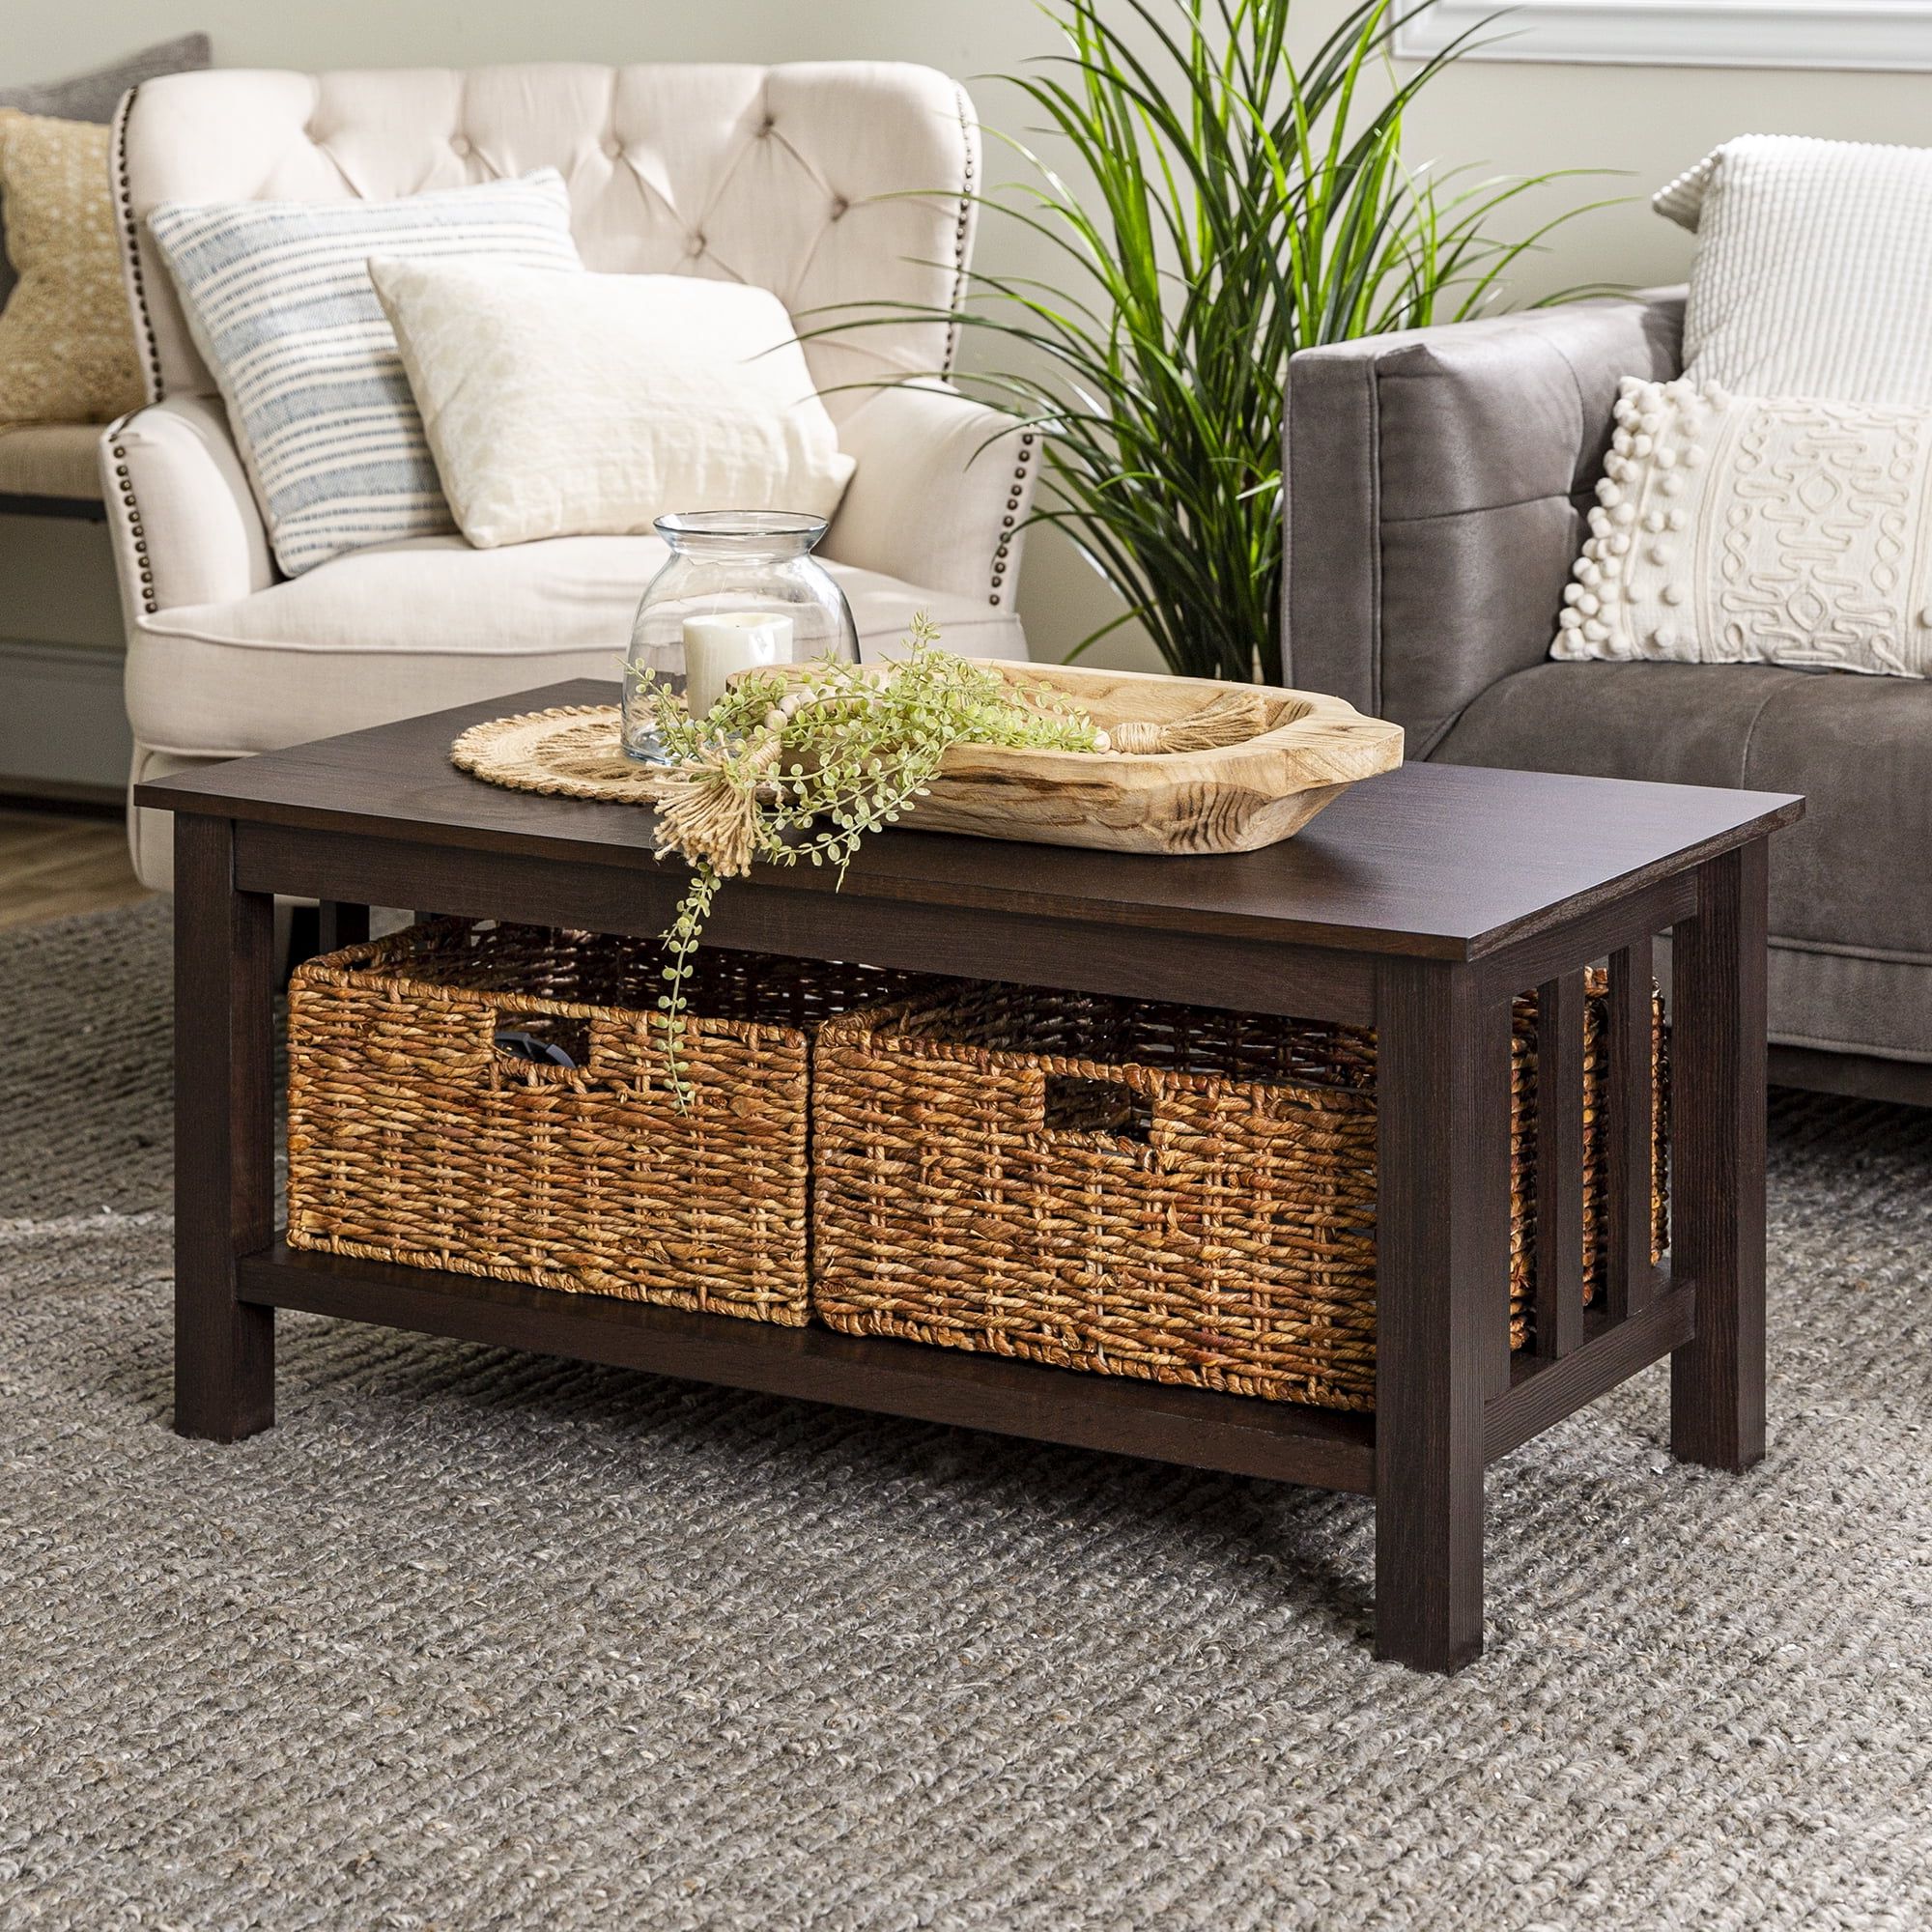 Woven Paths Traditional Storage Coffee Table With Bins, Espresso With Regard To Woven Paths Coffee Tables (View 8 of 20)